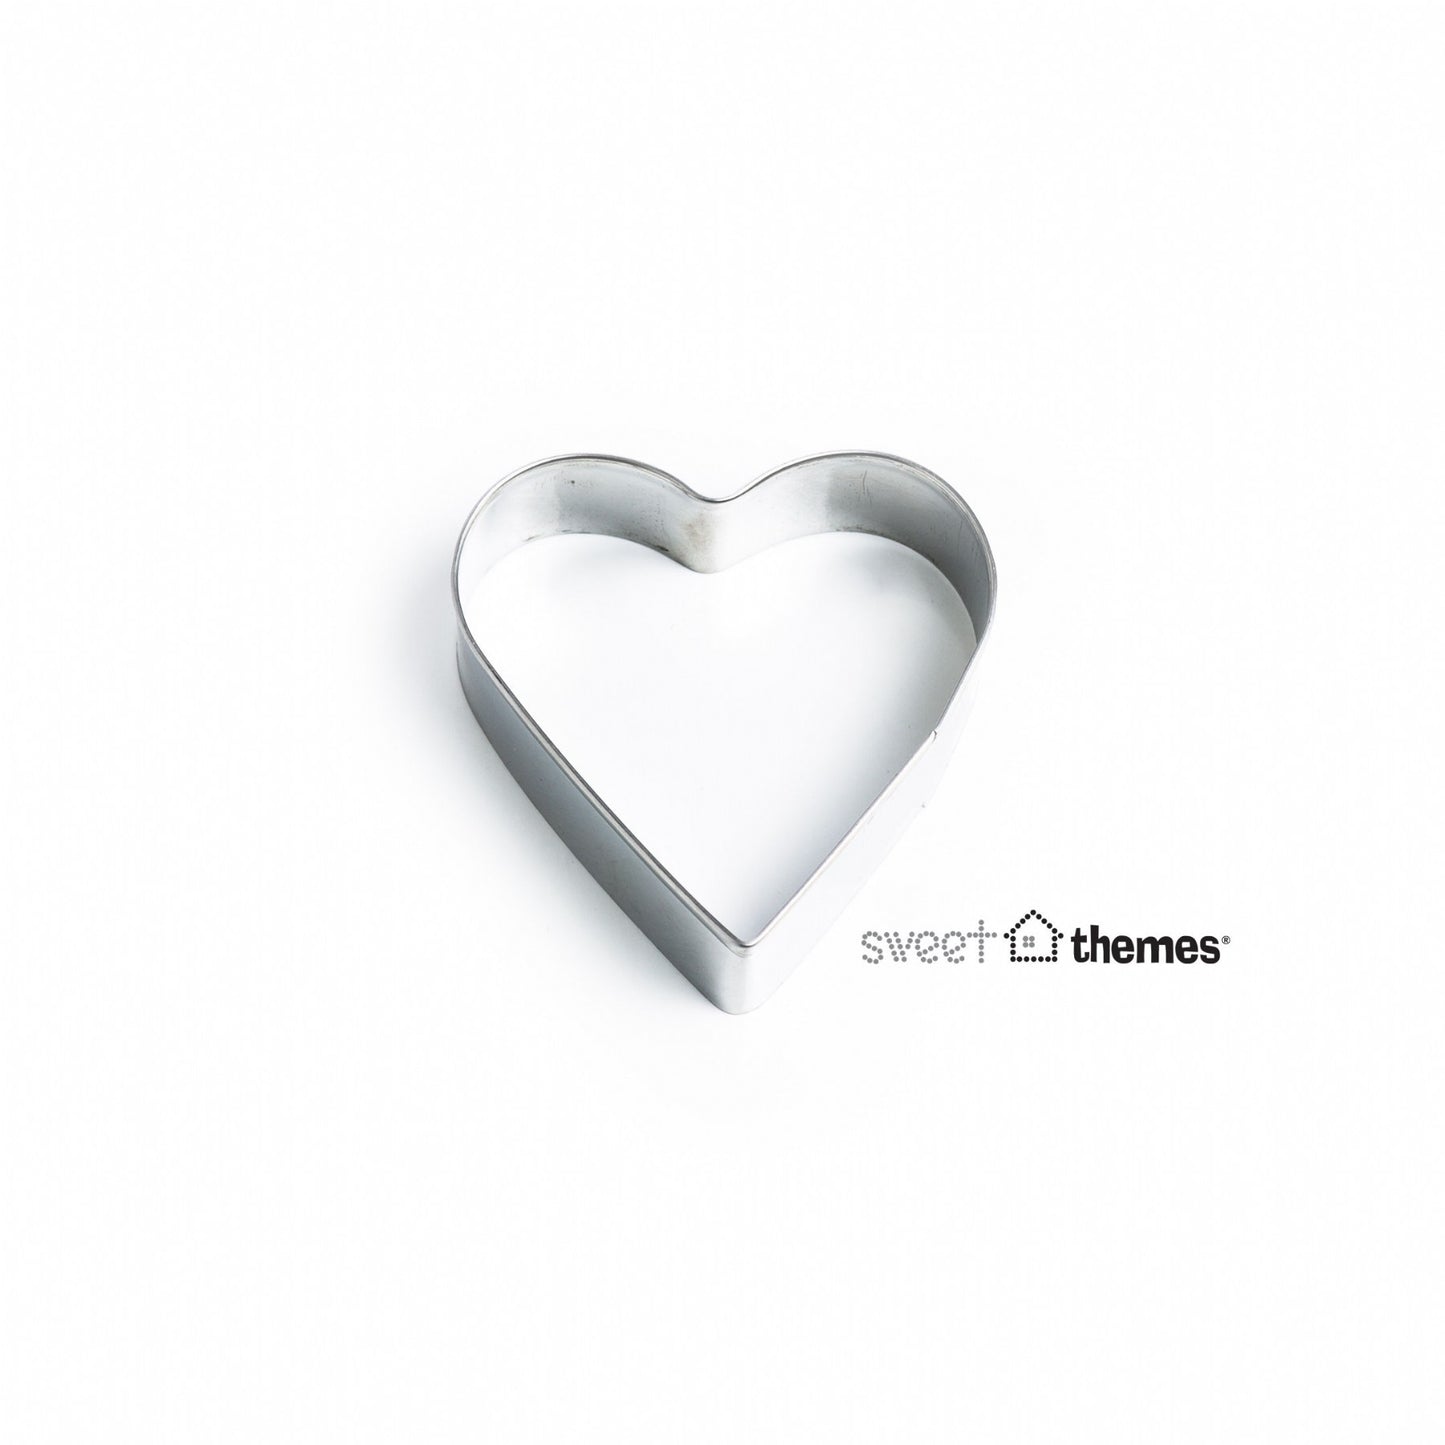 Heart Large Medium 7.5cm Stainless Steel Cookie Cutter